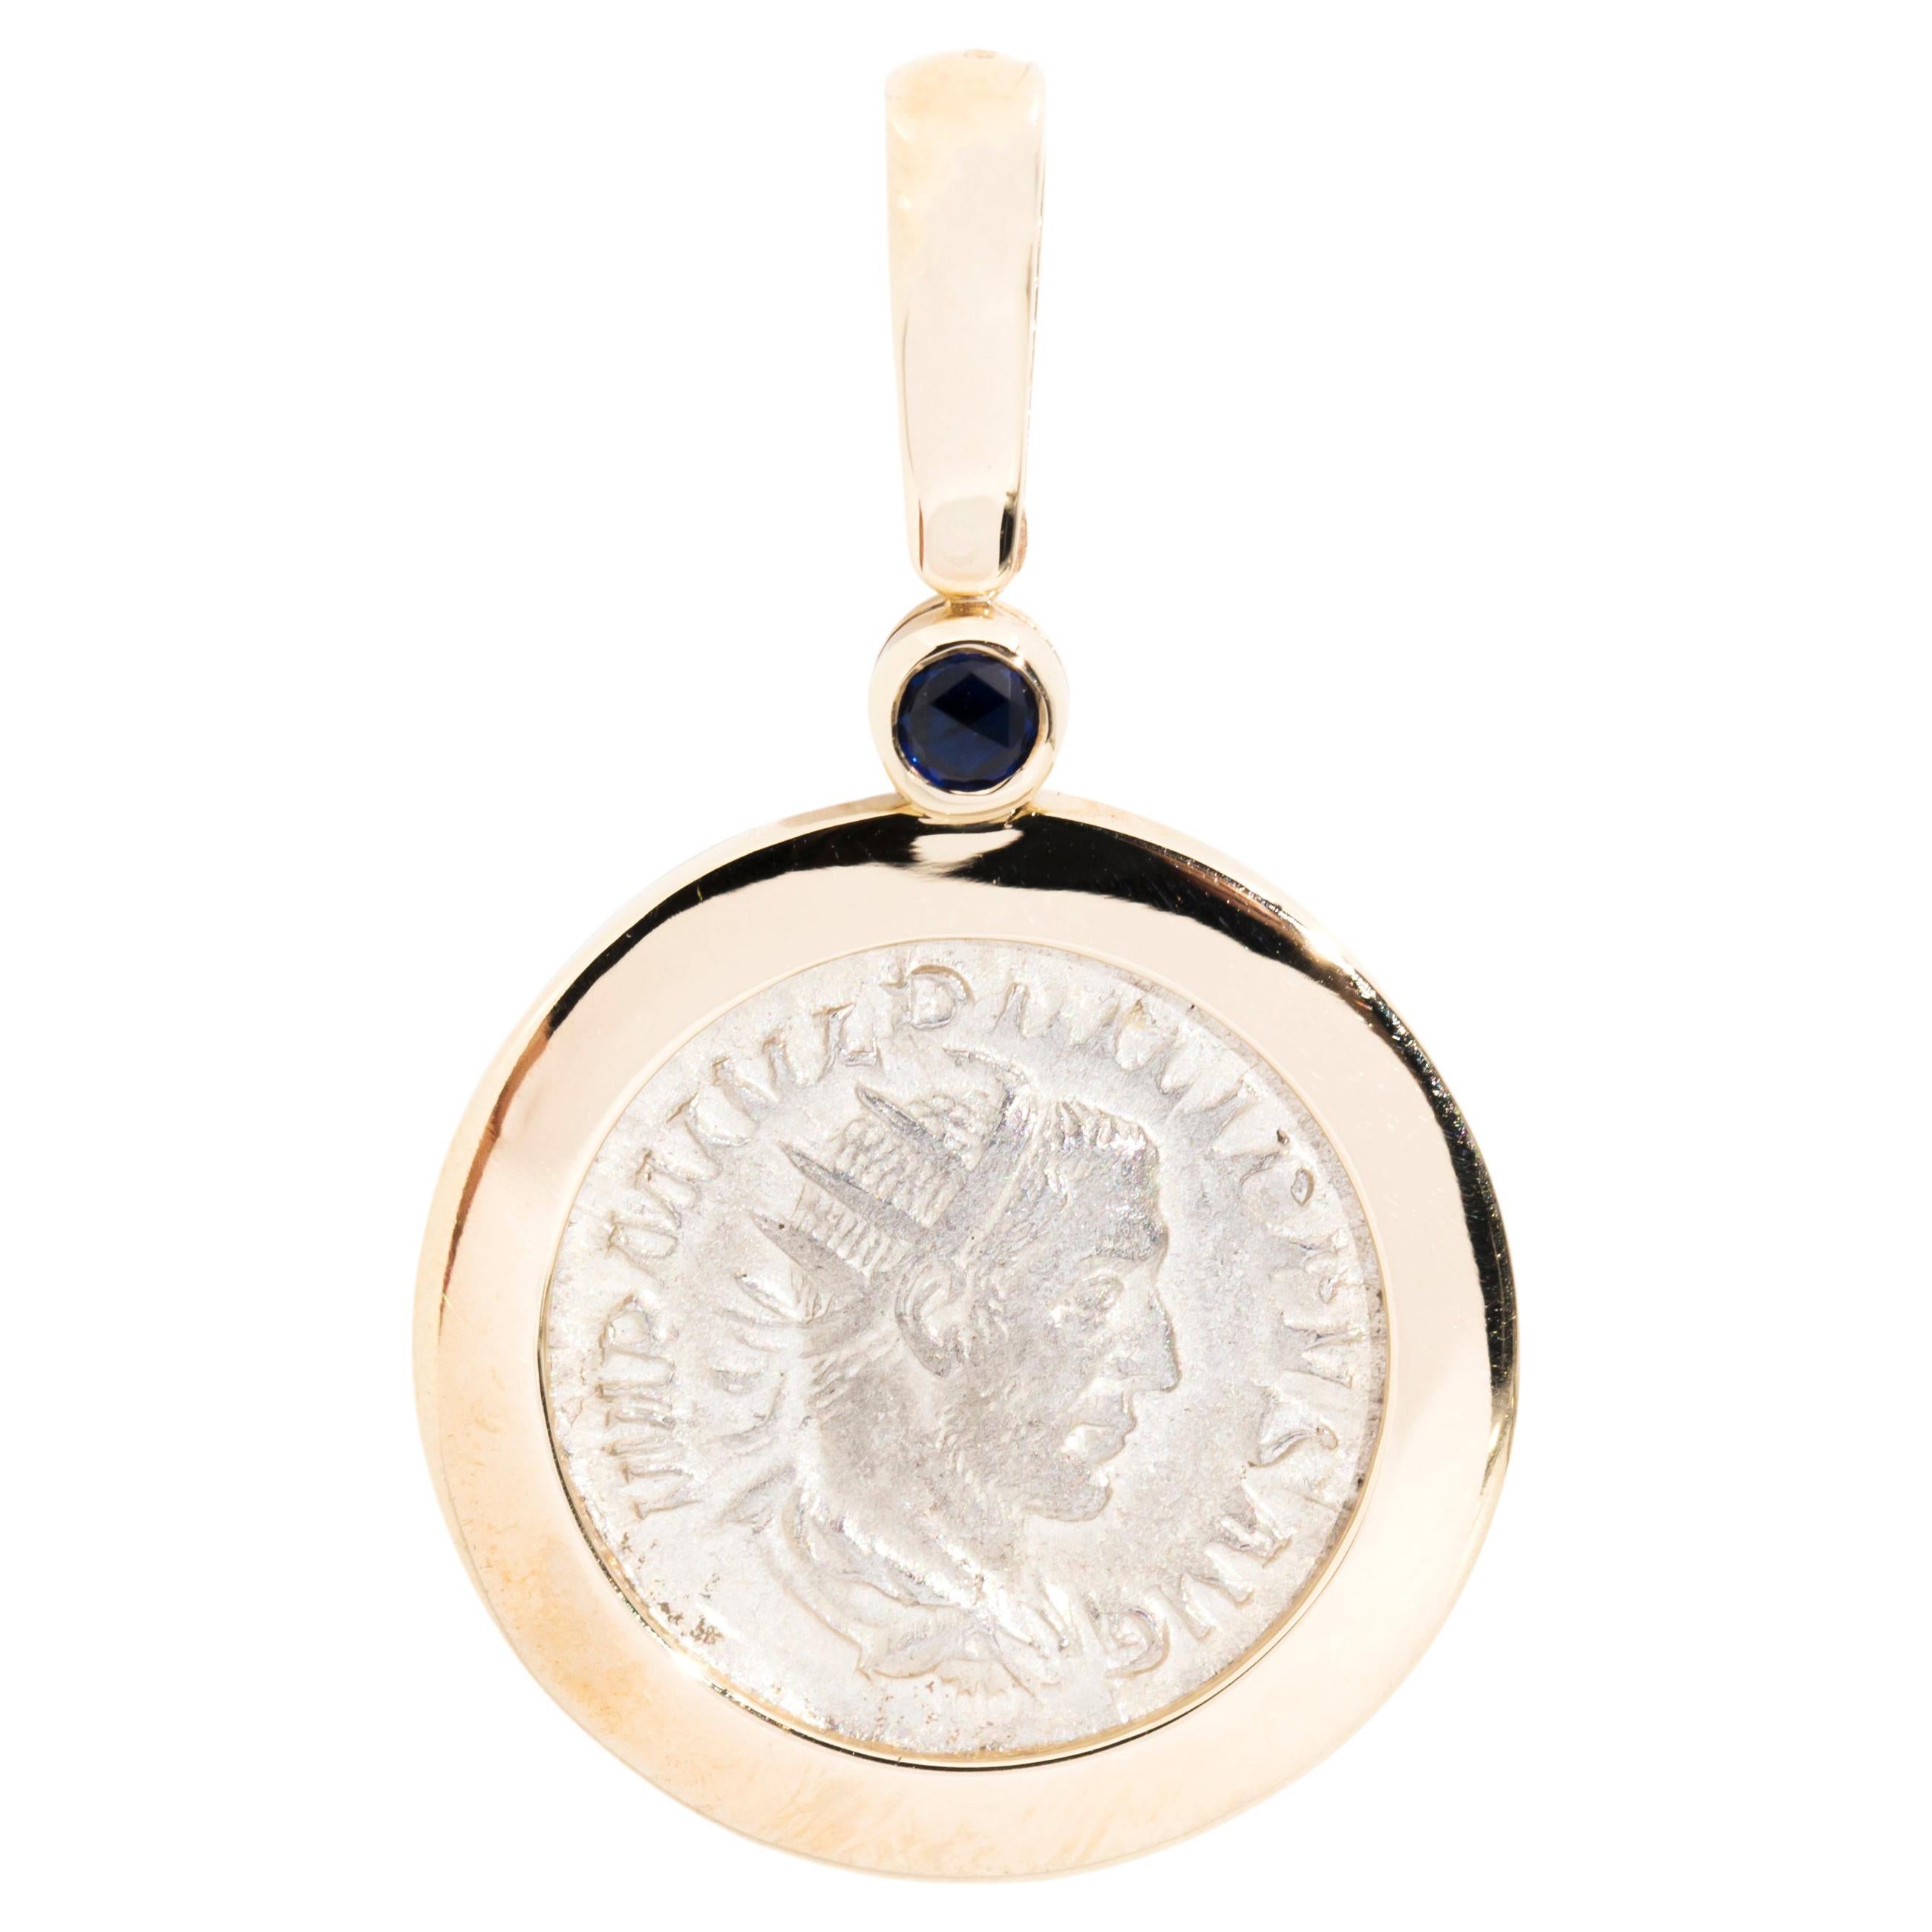 Emperor Philip I the Arab and Salus Ancient Coin Pendant in 9 Carat Yellow Gold